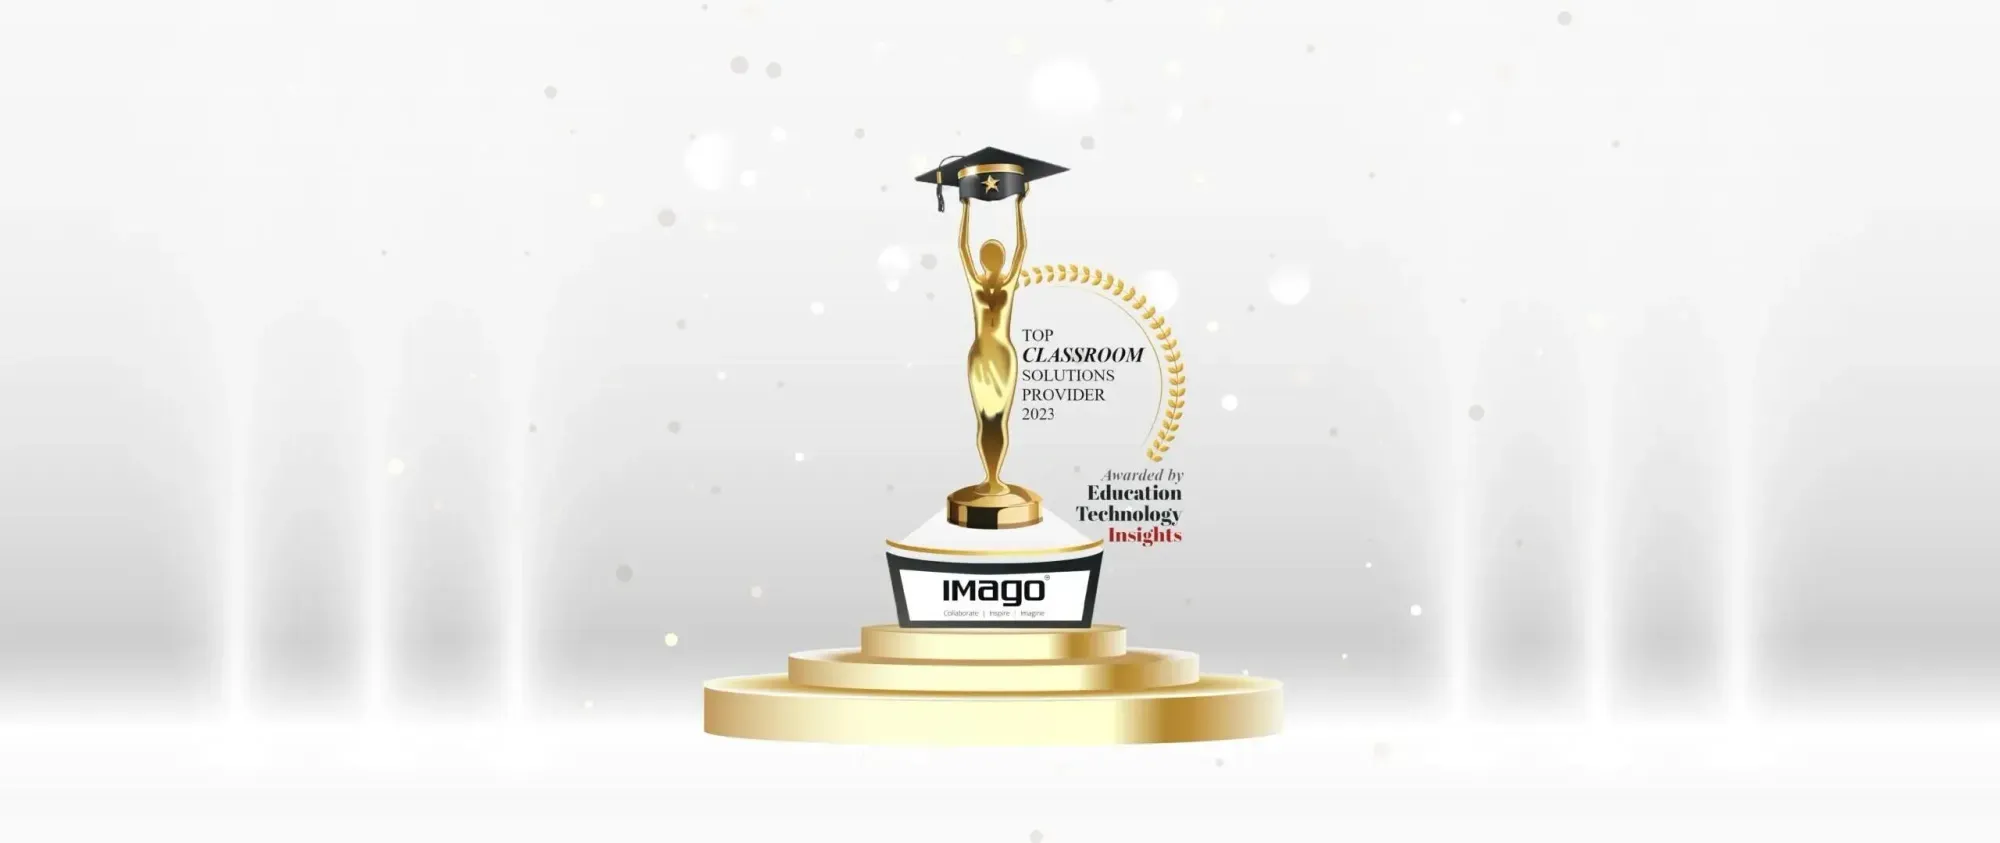 IMAGO Honored In Top 10 Classroom Solutions Providers 2023